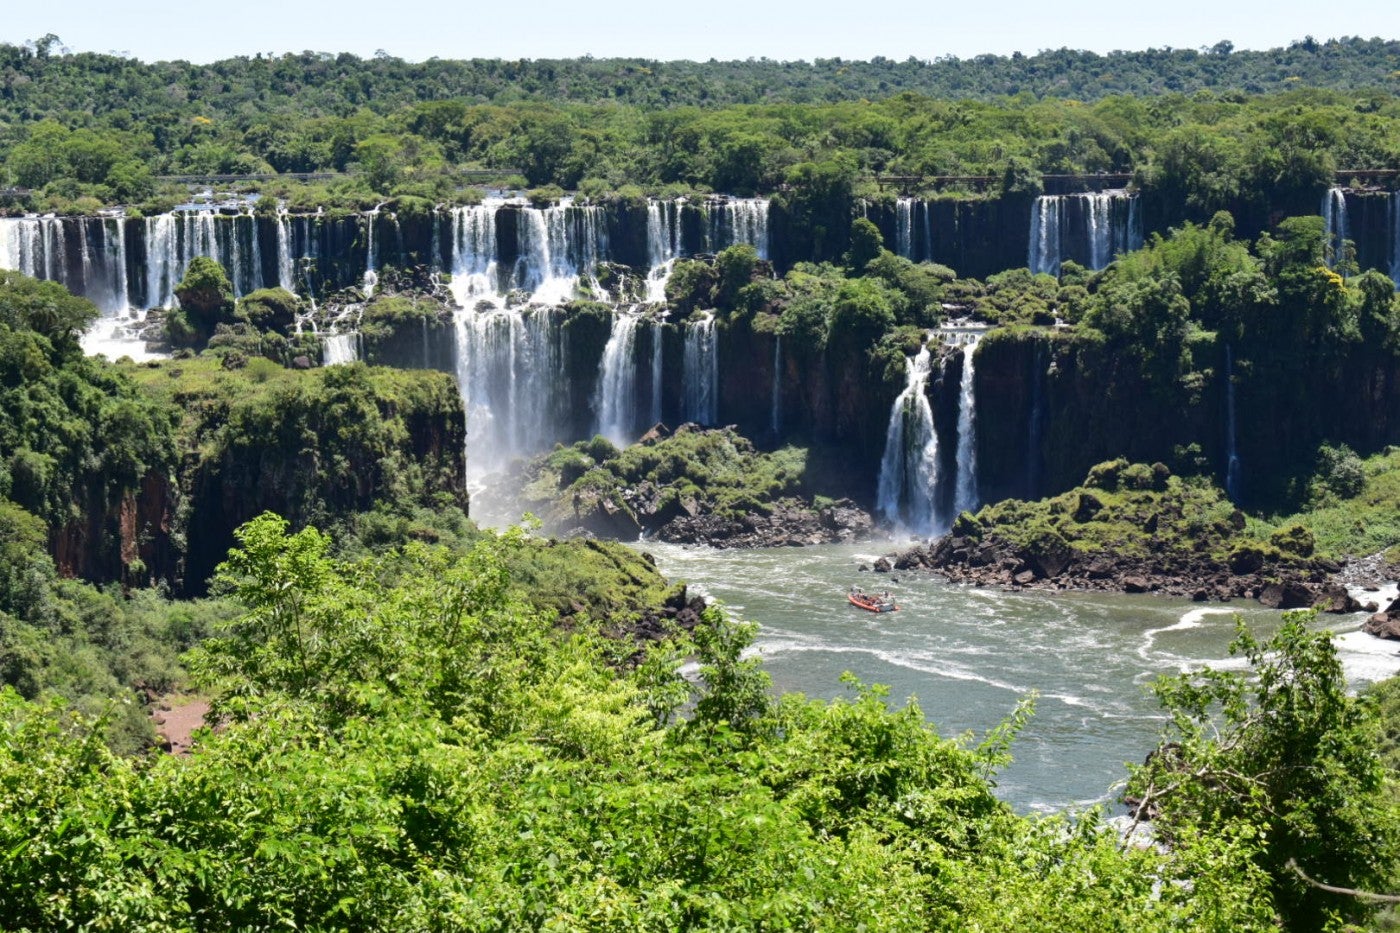 a large waterfall is seen from a distance. lush vegetation surrounds the area.